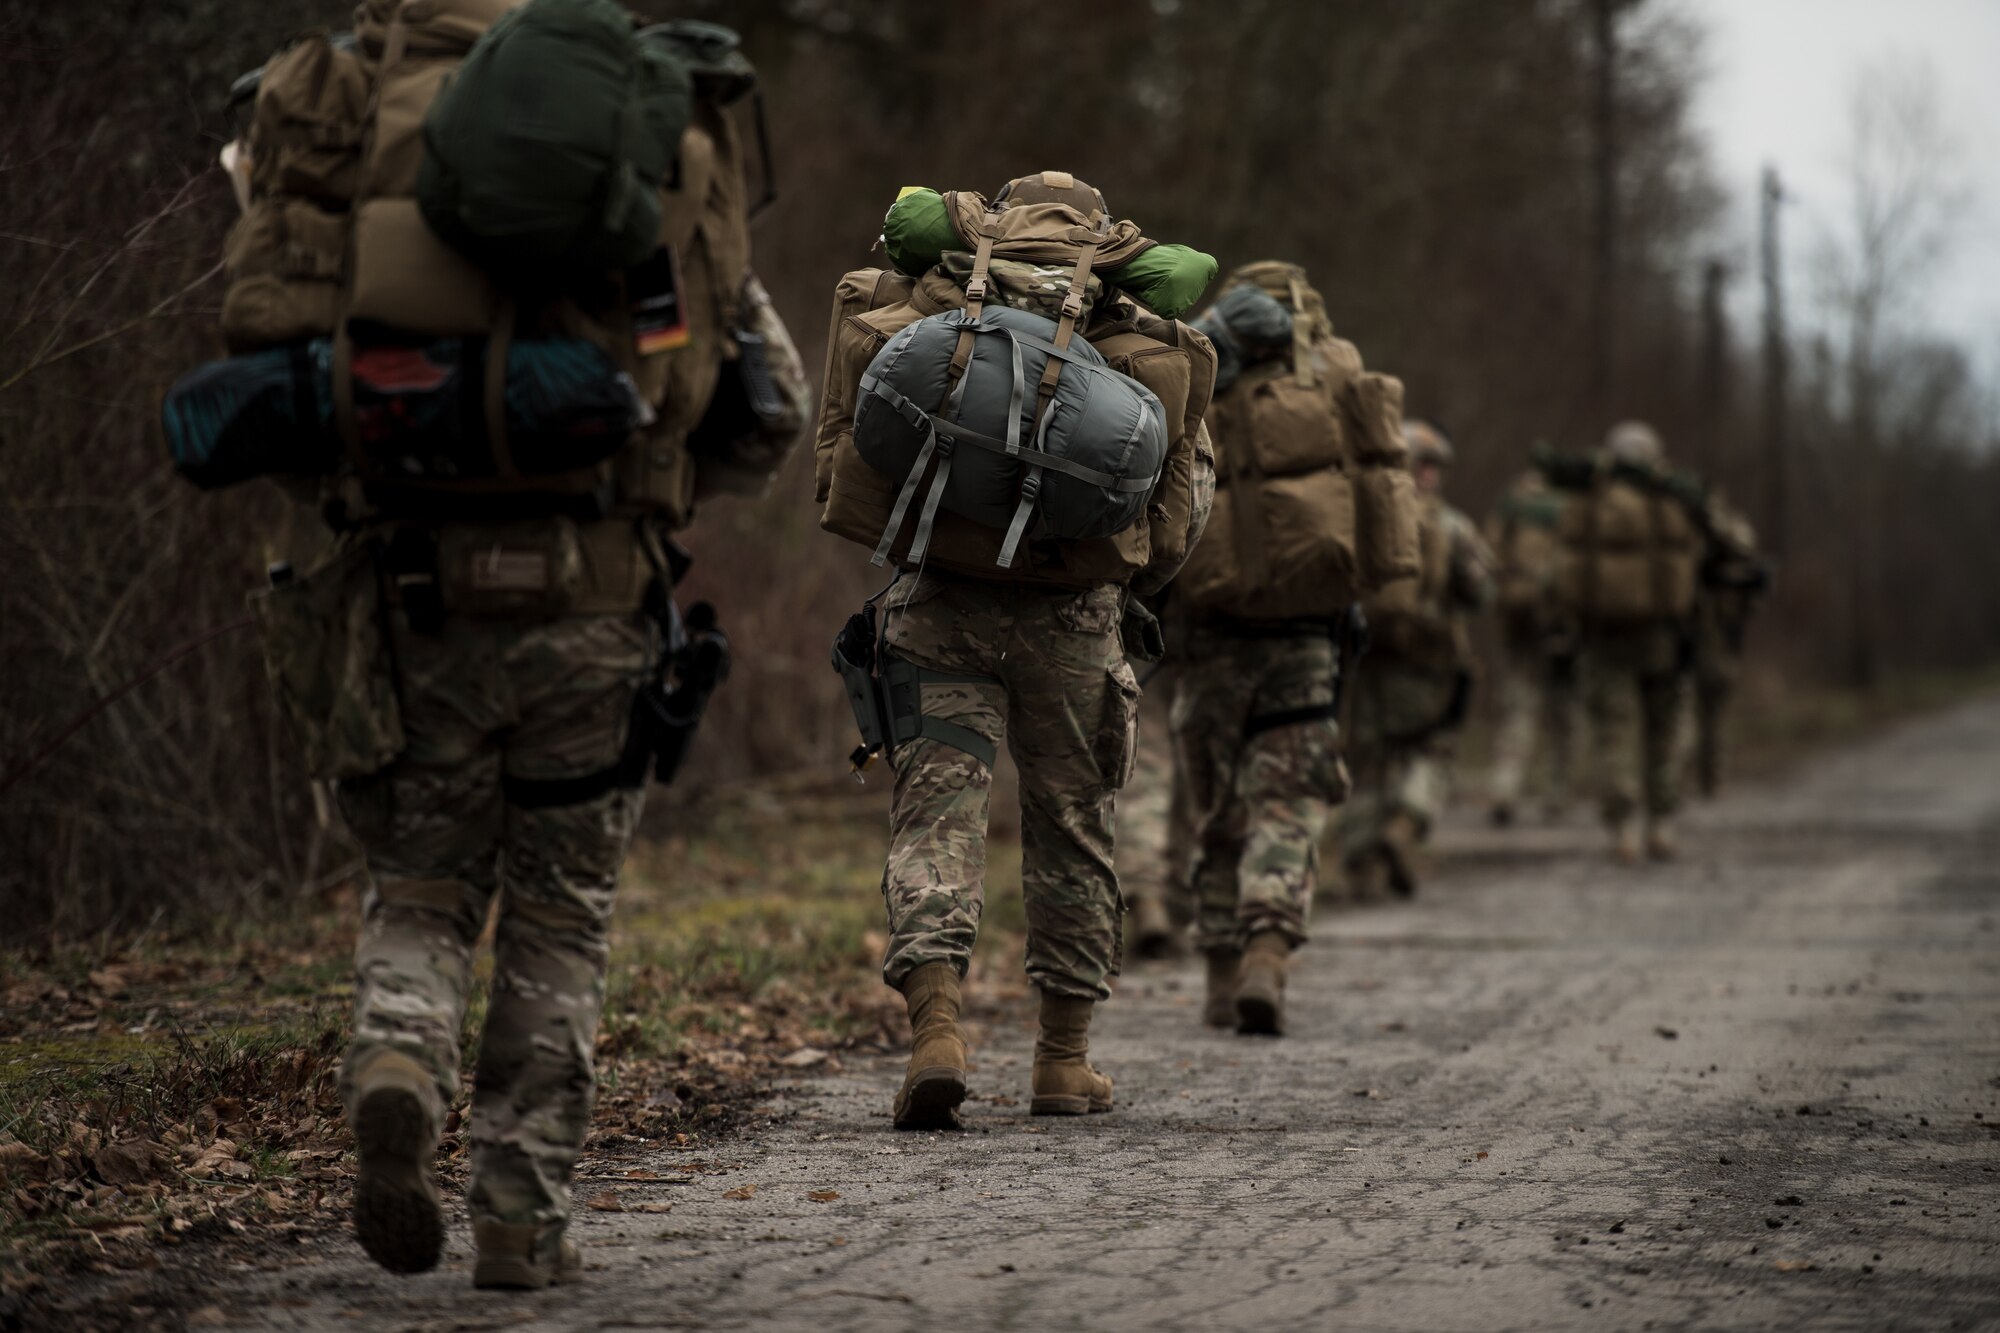 U.S. Airmen assigned to the 435th Security Forces Squadron carry their supplies to a rally point during exercise Frozen Defender in Grostenquin, France, Jan. 14, 2020. Frozen Defender tests the squadron’s capabilities in a contested environment under harsh conditions. The Defenders quietly entered the training site in formation while providing security from all directions. (U.S. Air Force photo by Staff Sgt. Devin Boyer)